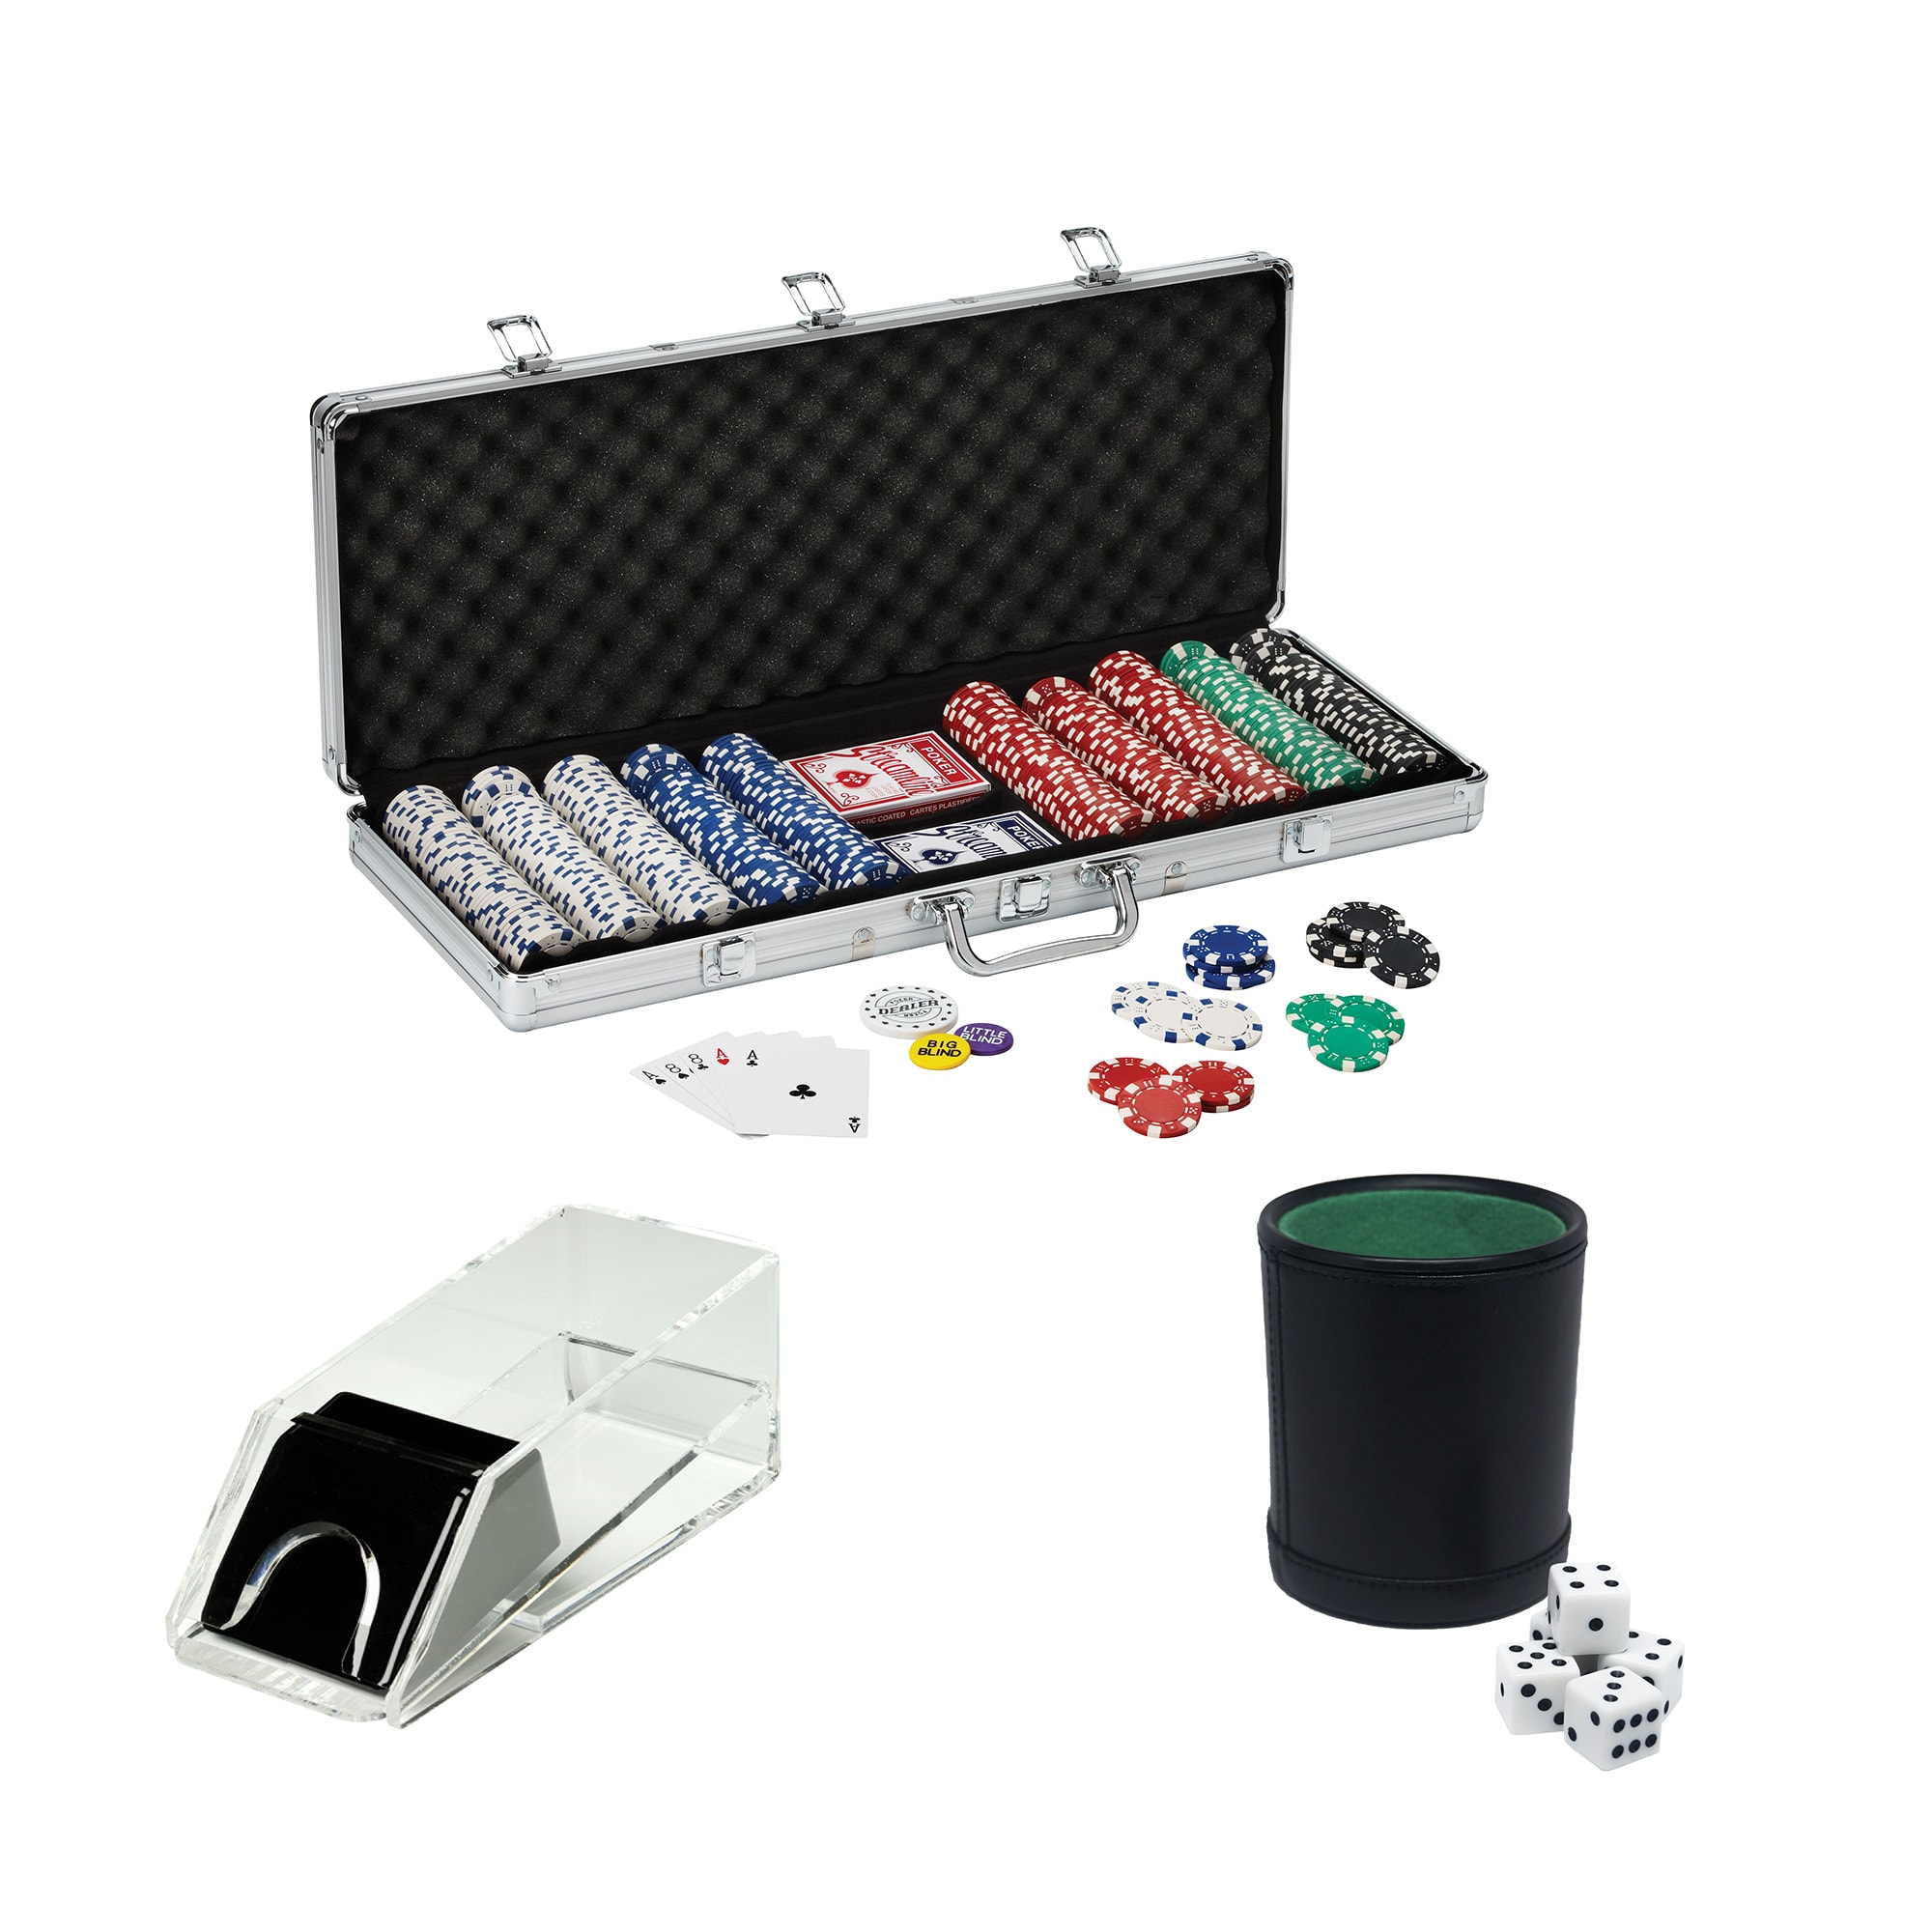 Fat Cat 500Ct Texas Hold'Em Dice Poker Chip Set, Fat Cat Four Deck Card Shoe, and Fat Cat Dice Cup & Dice - image 1 of 4